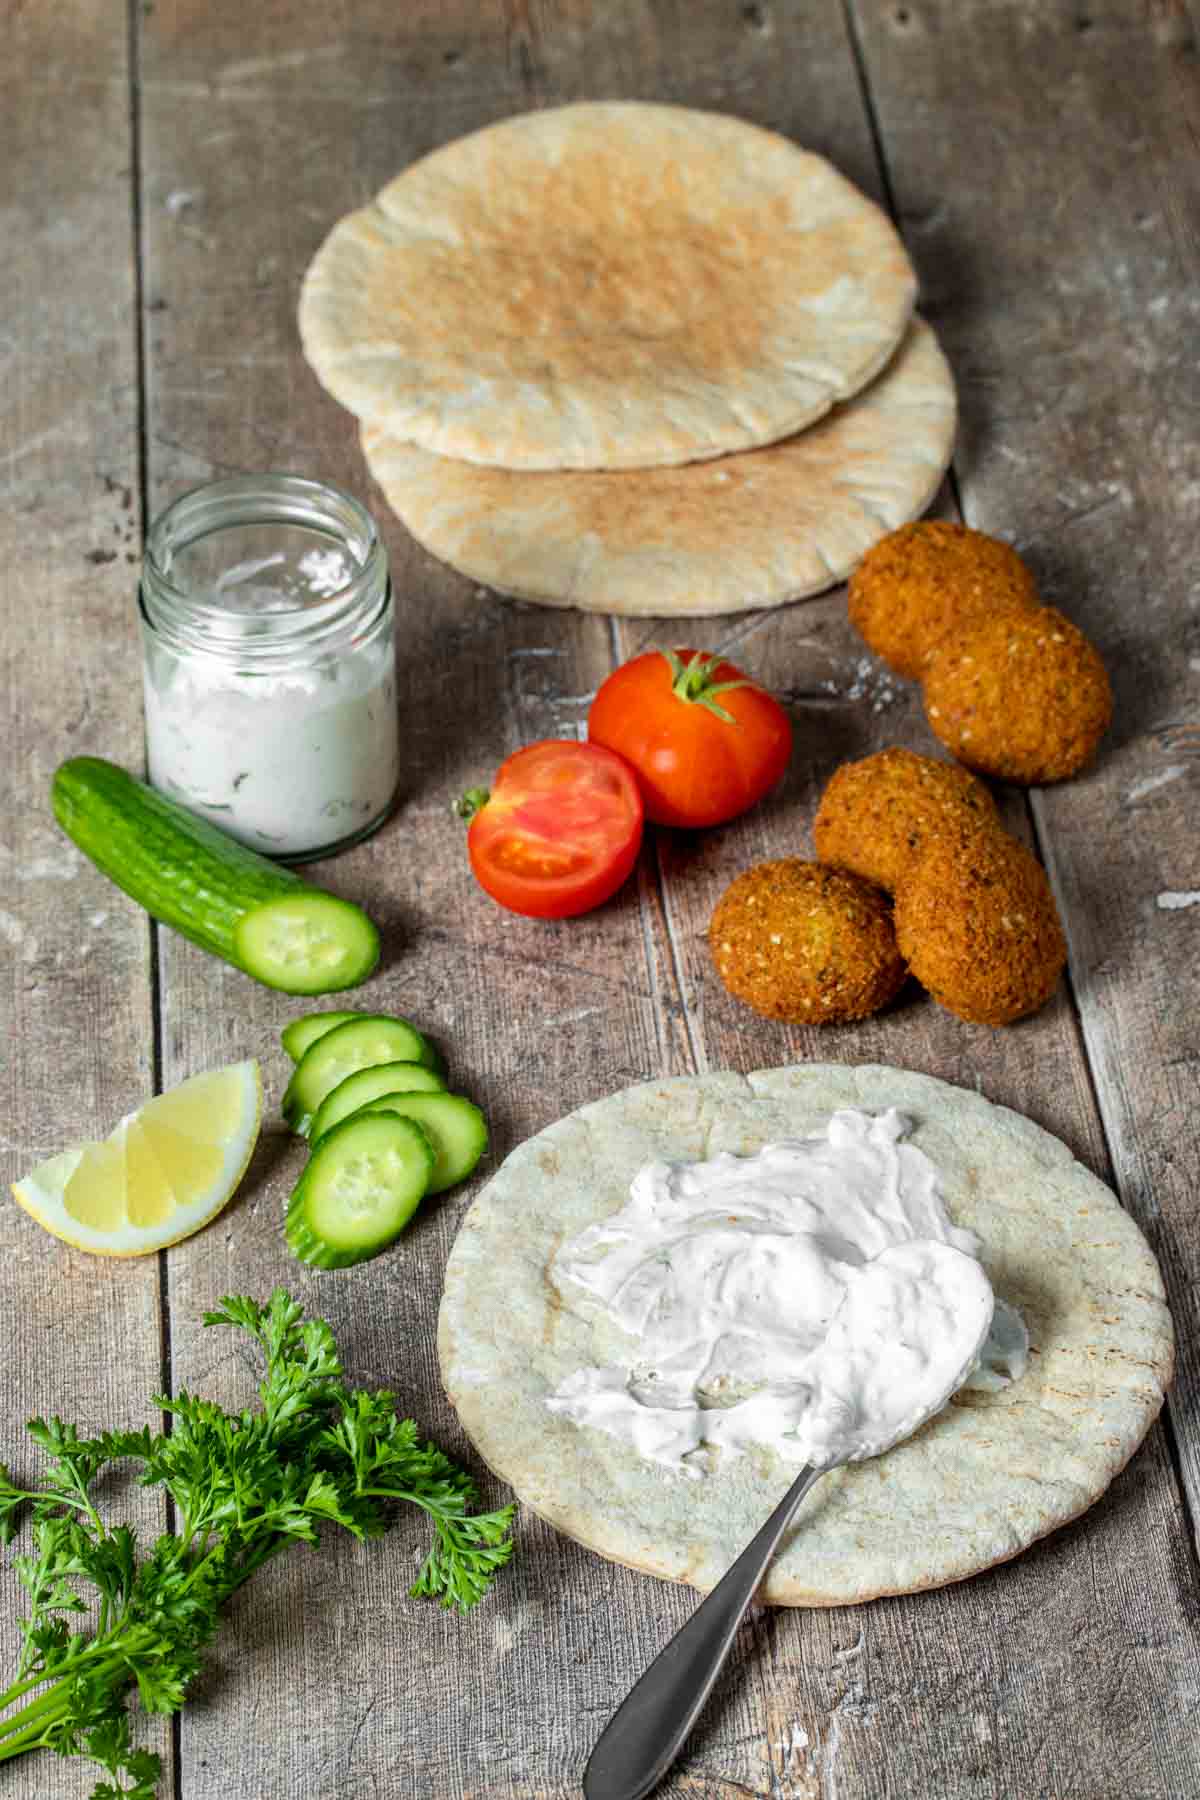 A wooden table with ingredients to make a falafel pita and one pita with sauce on it next to them.